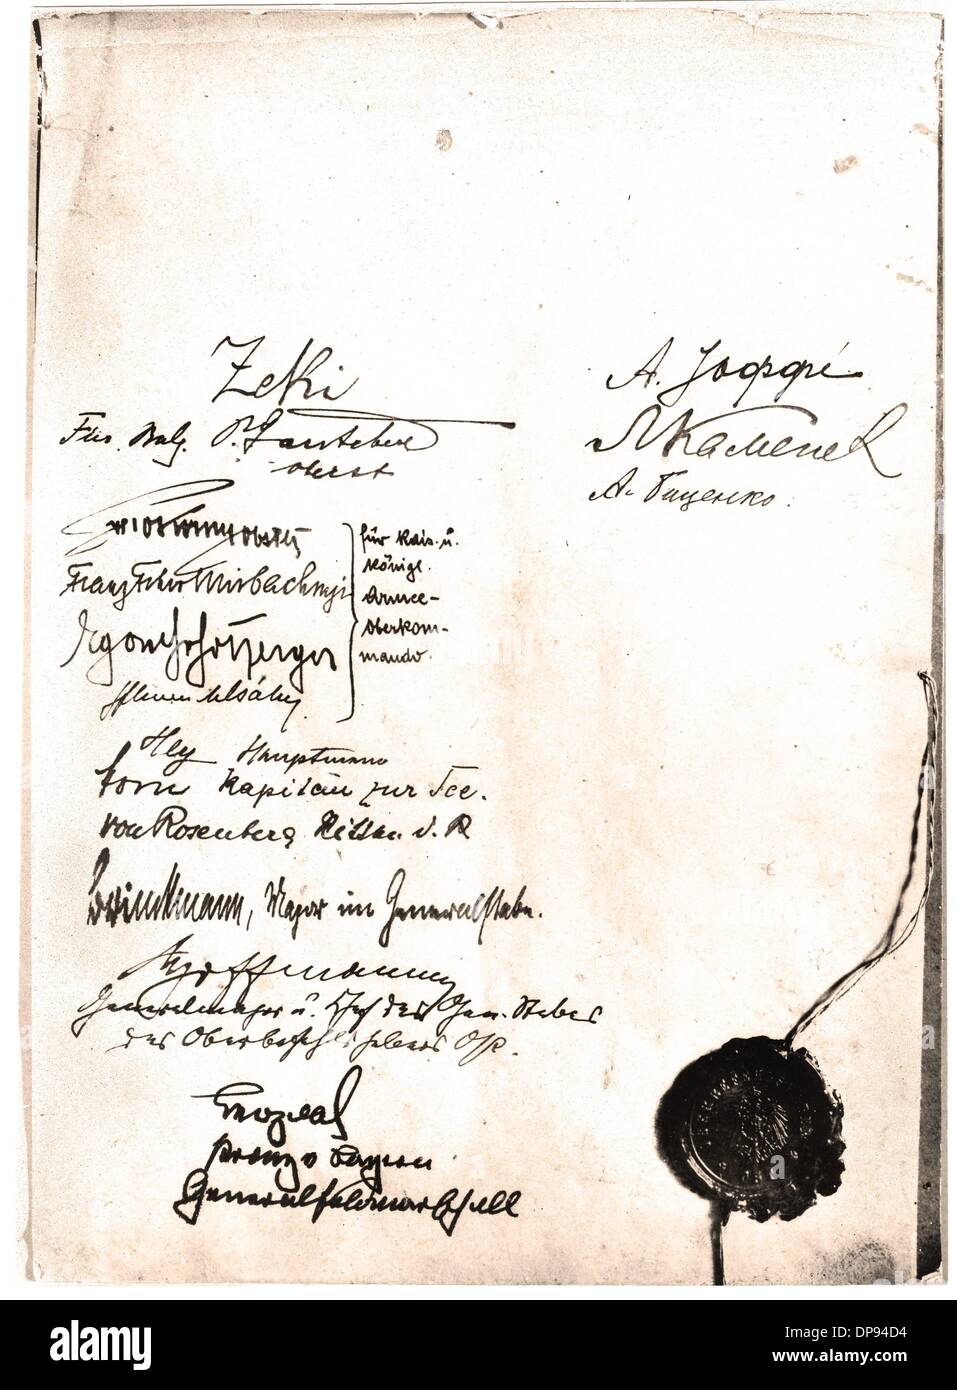 Signatures and seal of the ceasefire agreement of 15 December 1917. During the peace negotiations, an exclusive protectorate treaty of the Central Powers with the Ukranian People's Republic was signed on 9 February 1918. The negotiations ended with the signing of the peace treaty of Brest-Litovsk from 3 March 1918 between the Central Powers and the Soviet Russia. Photo: Berliner Verlag/Archiv Stock Photo